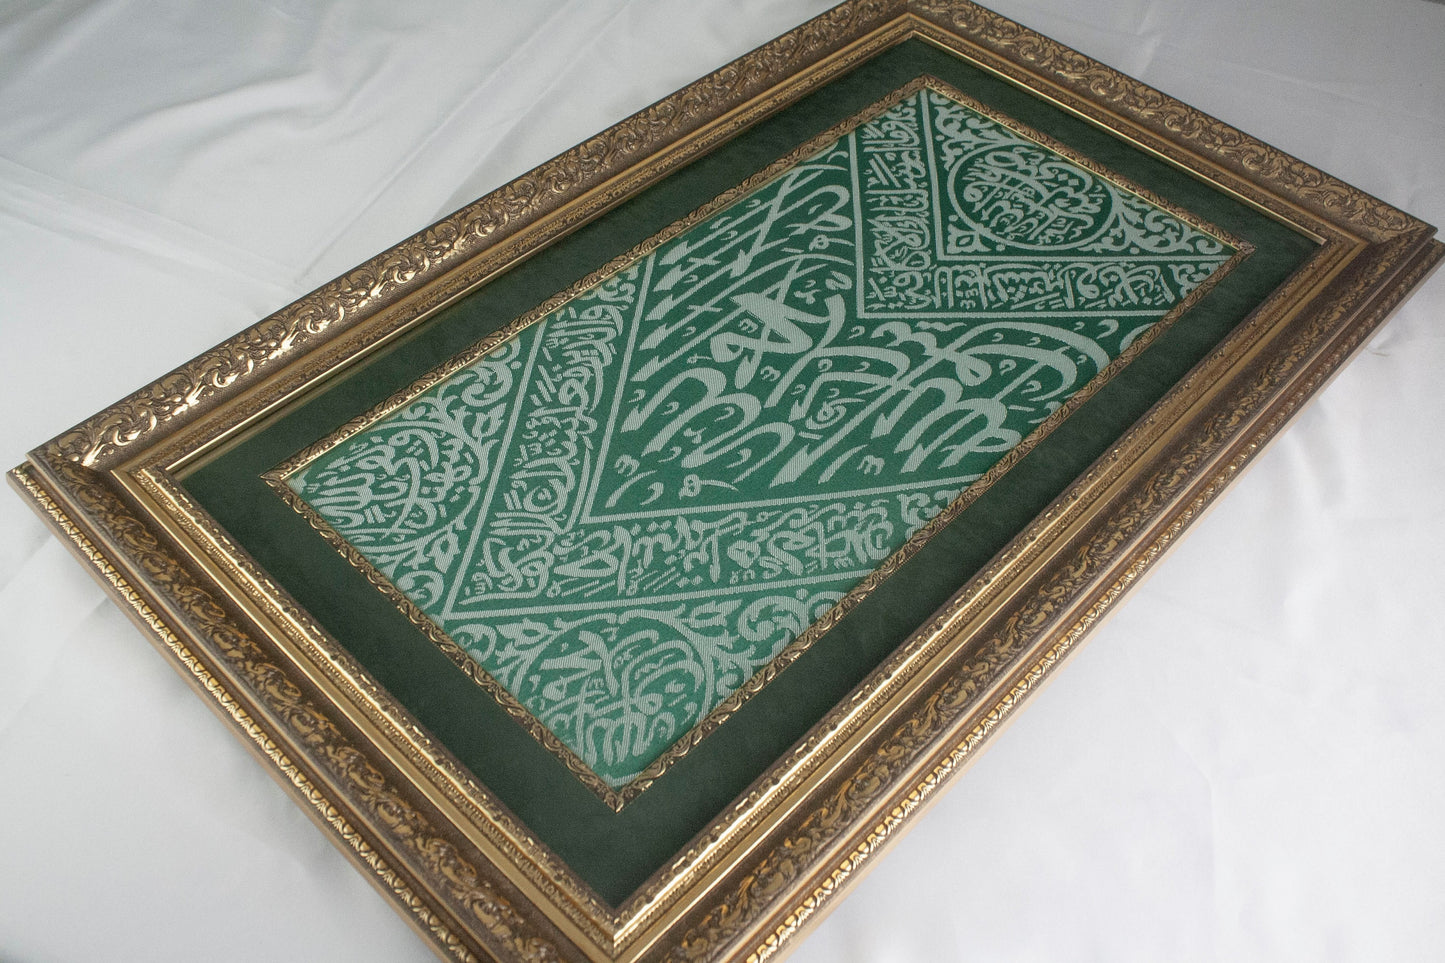 Unique Gift for Islamic Eid Al Adha/  Nabi Mohammed S.A.W Blessed Grave Cloth, Islamic Religious Gifts Gift for Muslim Father's Day